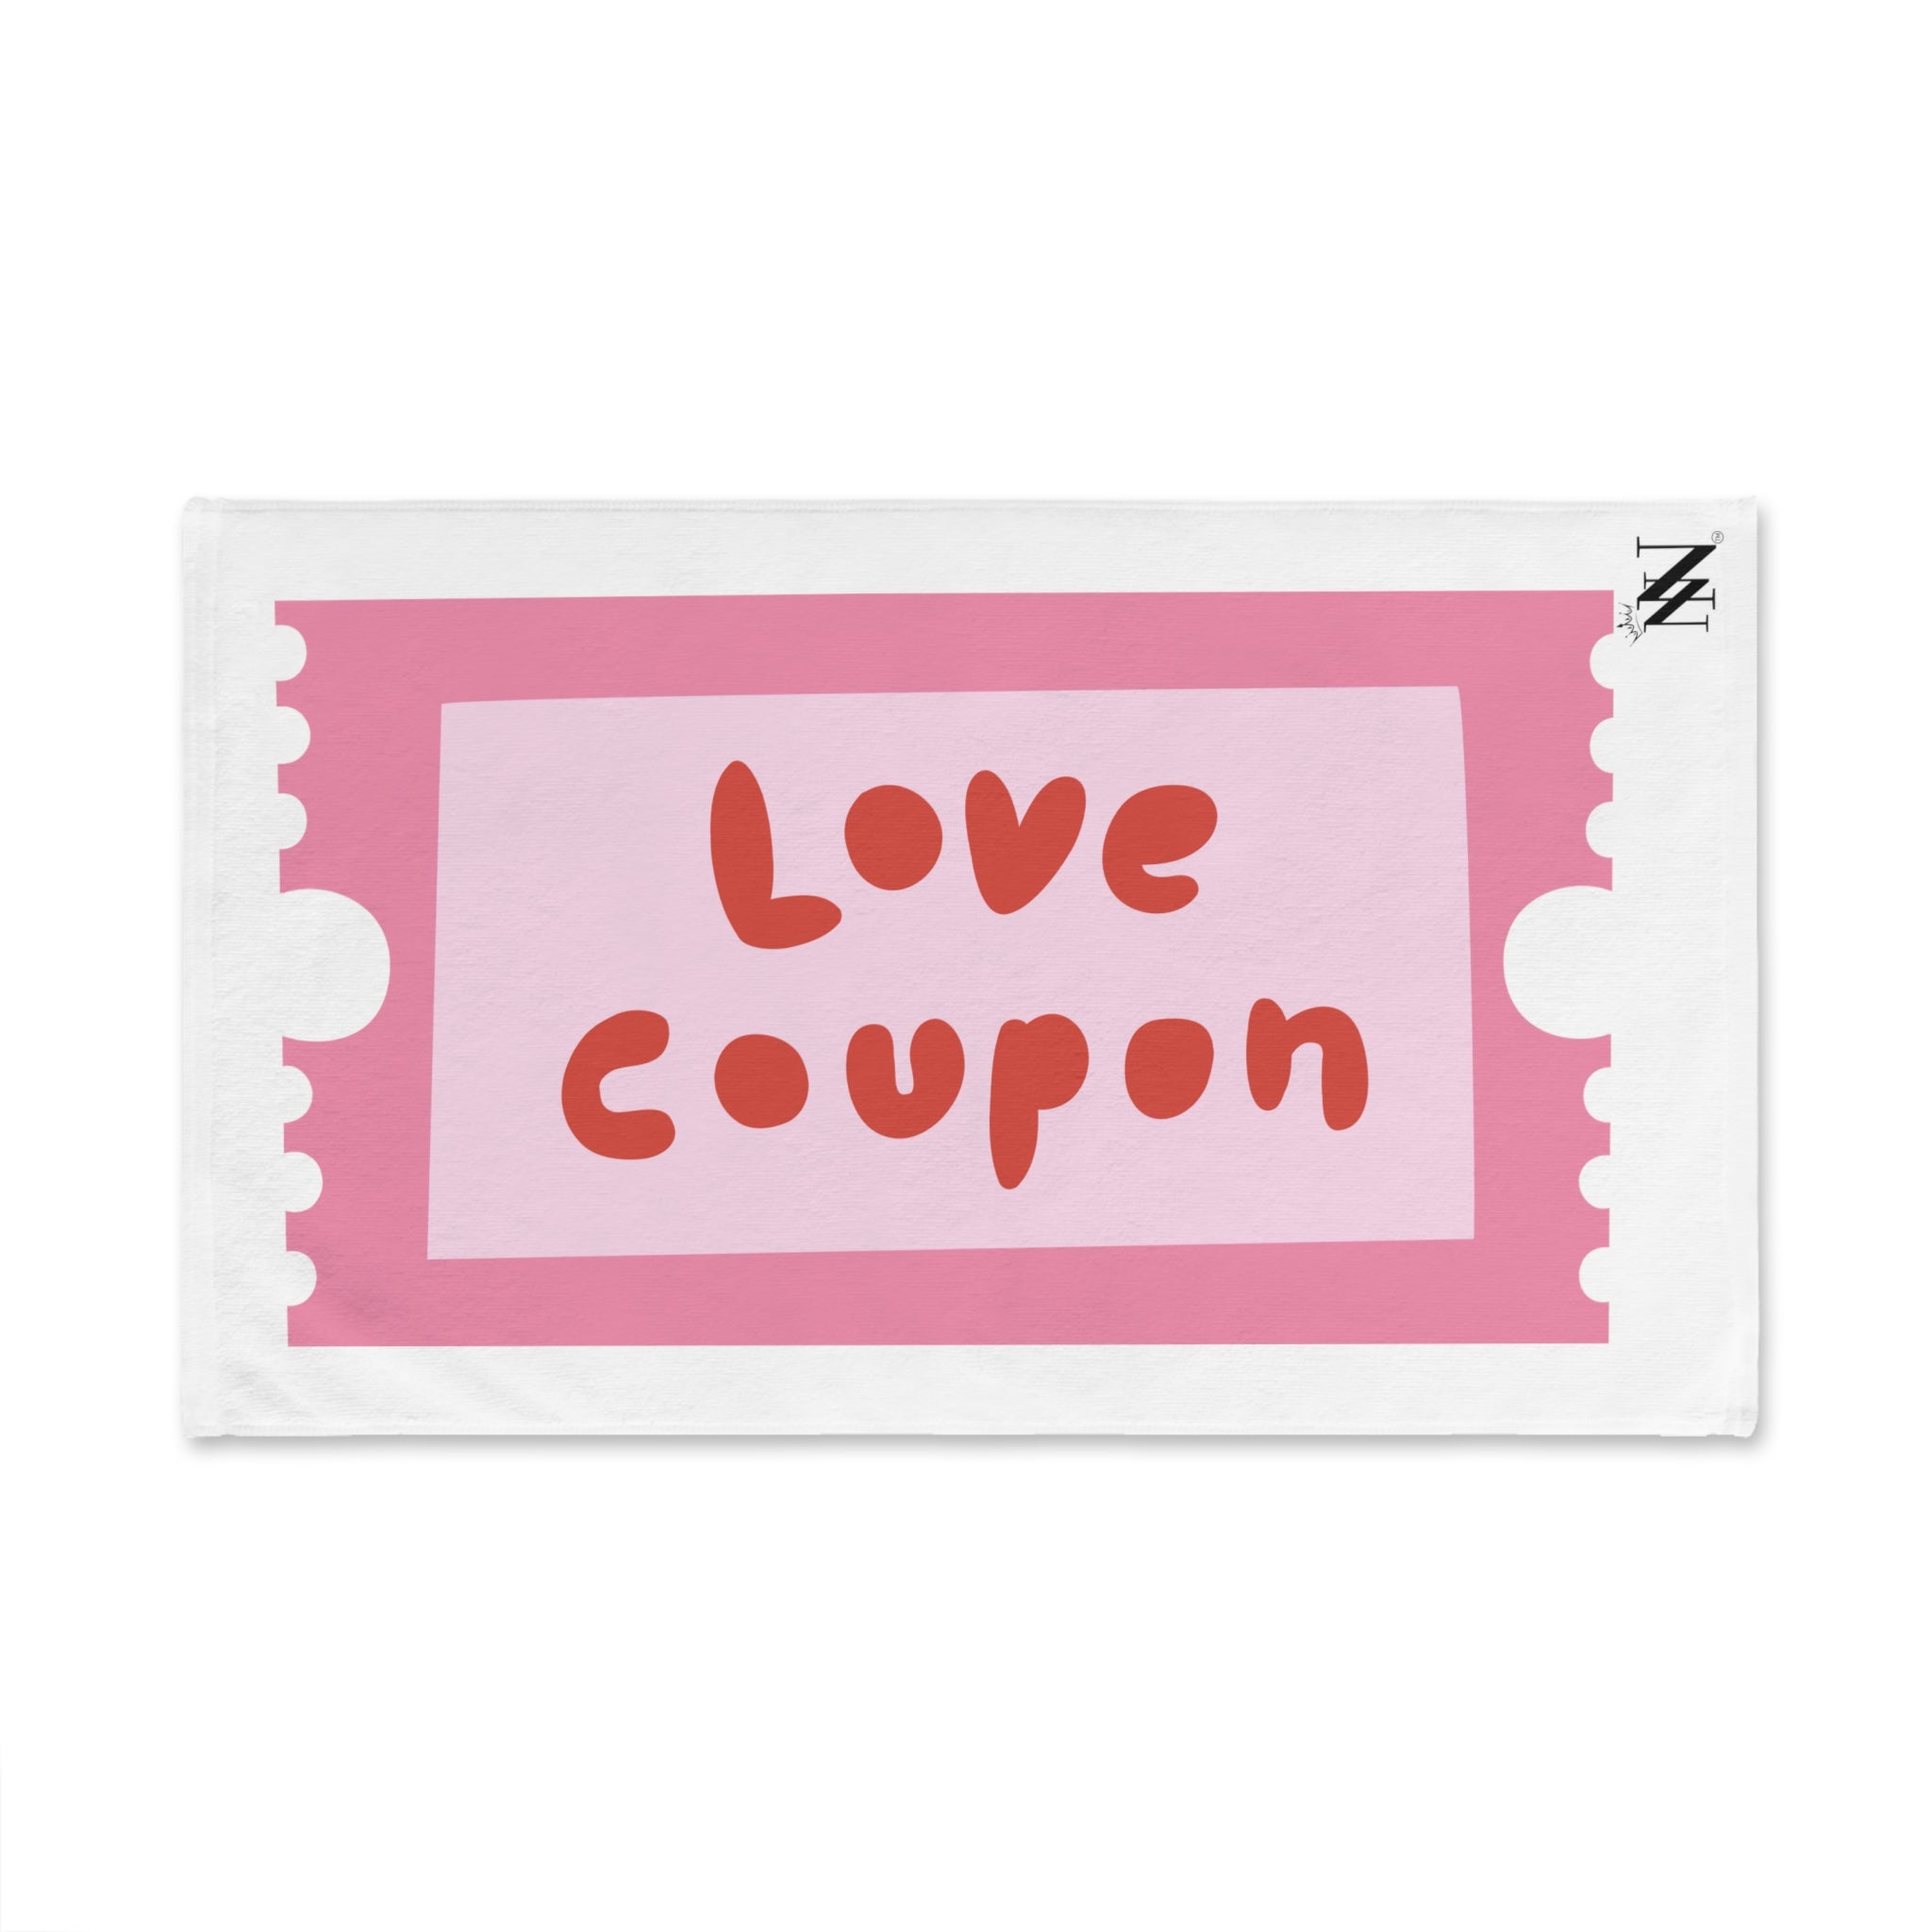 Love Coupon White | Funny Gifts for Men - Gifts for Him - Birthday Gifts for Men, Him, Her, Husband, Boyfriend, Girlfriend, New Couple Gifts, Fathers & Valentines Day Gifts, Christmas Gifts NECTAR NAPKINS